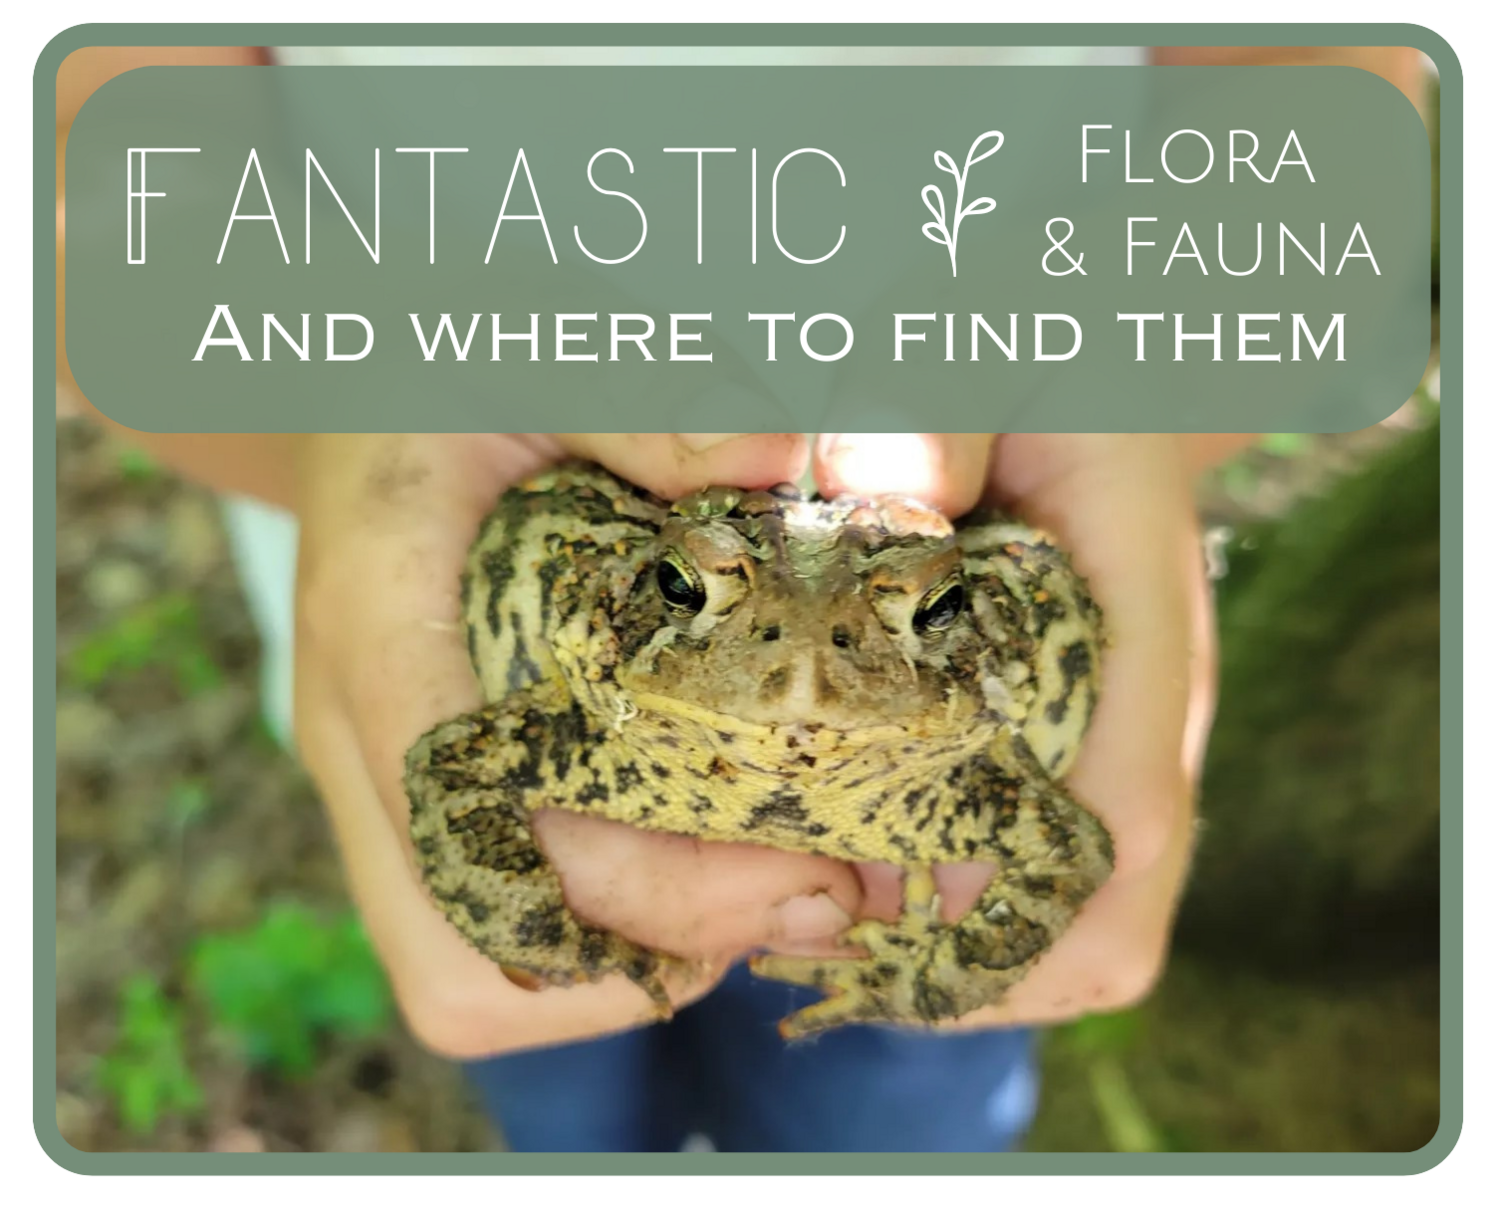 Fantastic Flora & Fauna and Where to Find Them: Session #1 March 26-28 (9 a.m.-11 a.m.) 1st-3rd Grade